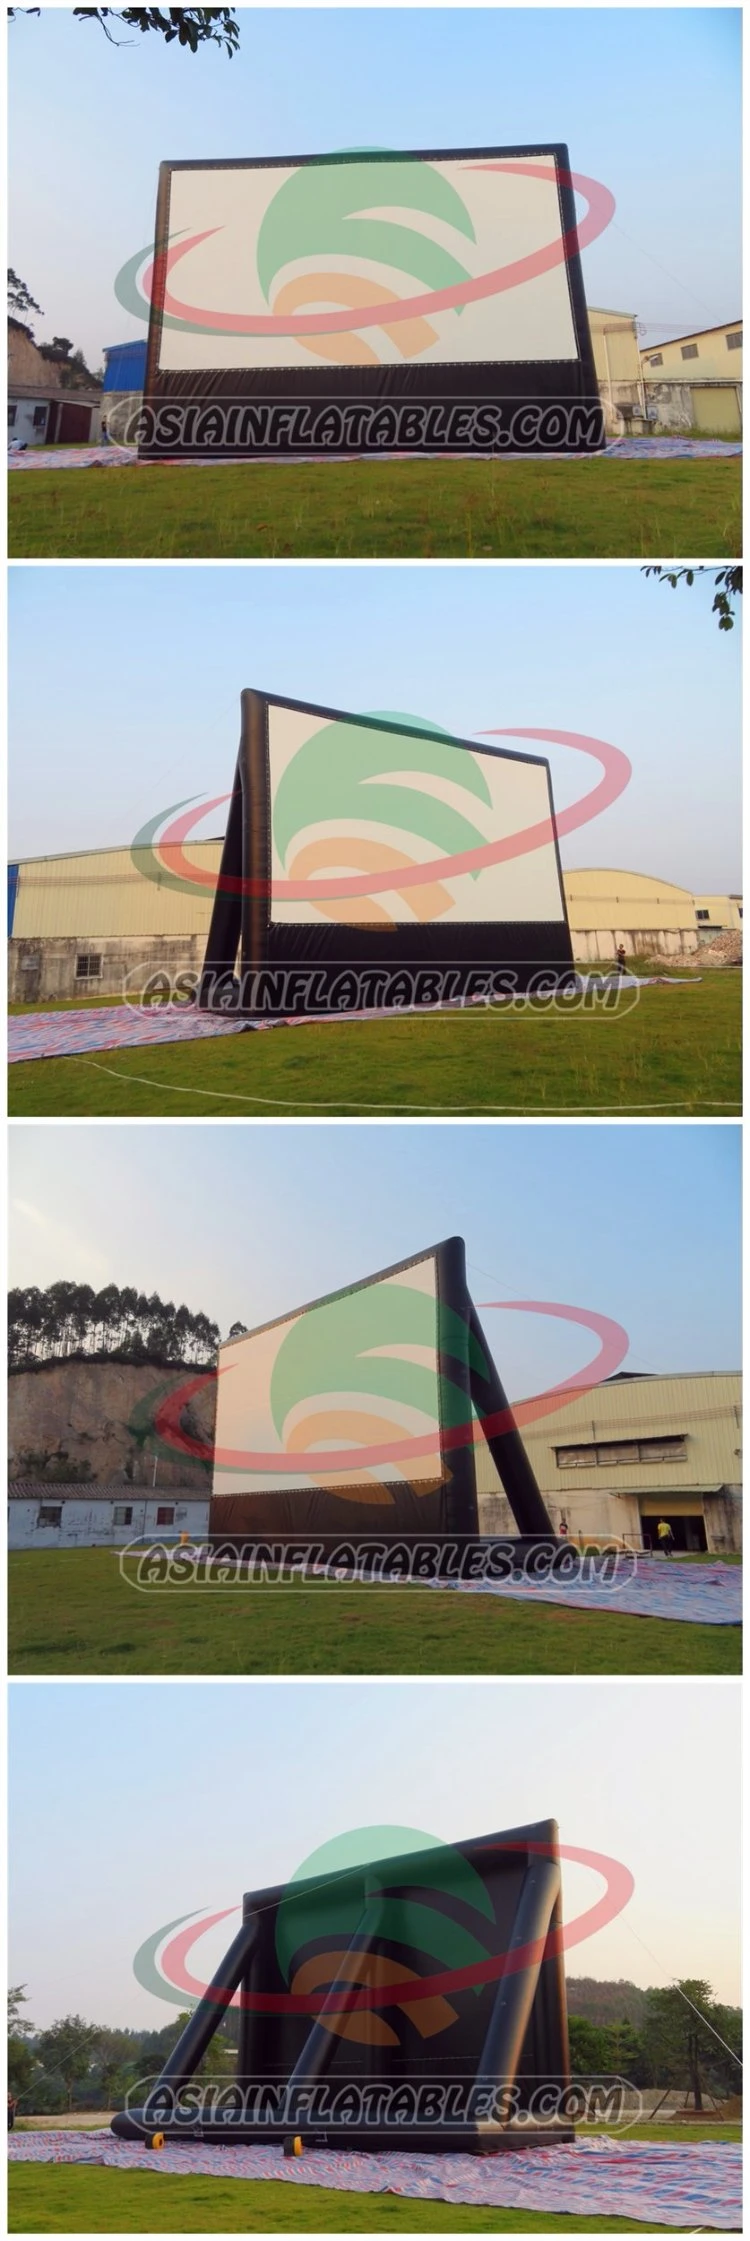 40FT Large Inflatable TV Movie Screen for Drive in Cinema Projector